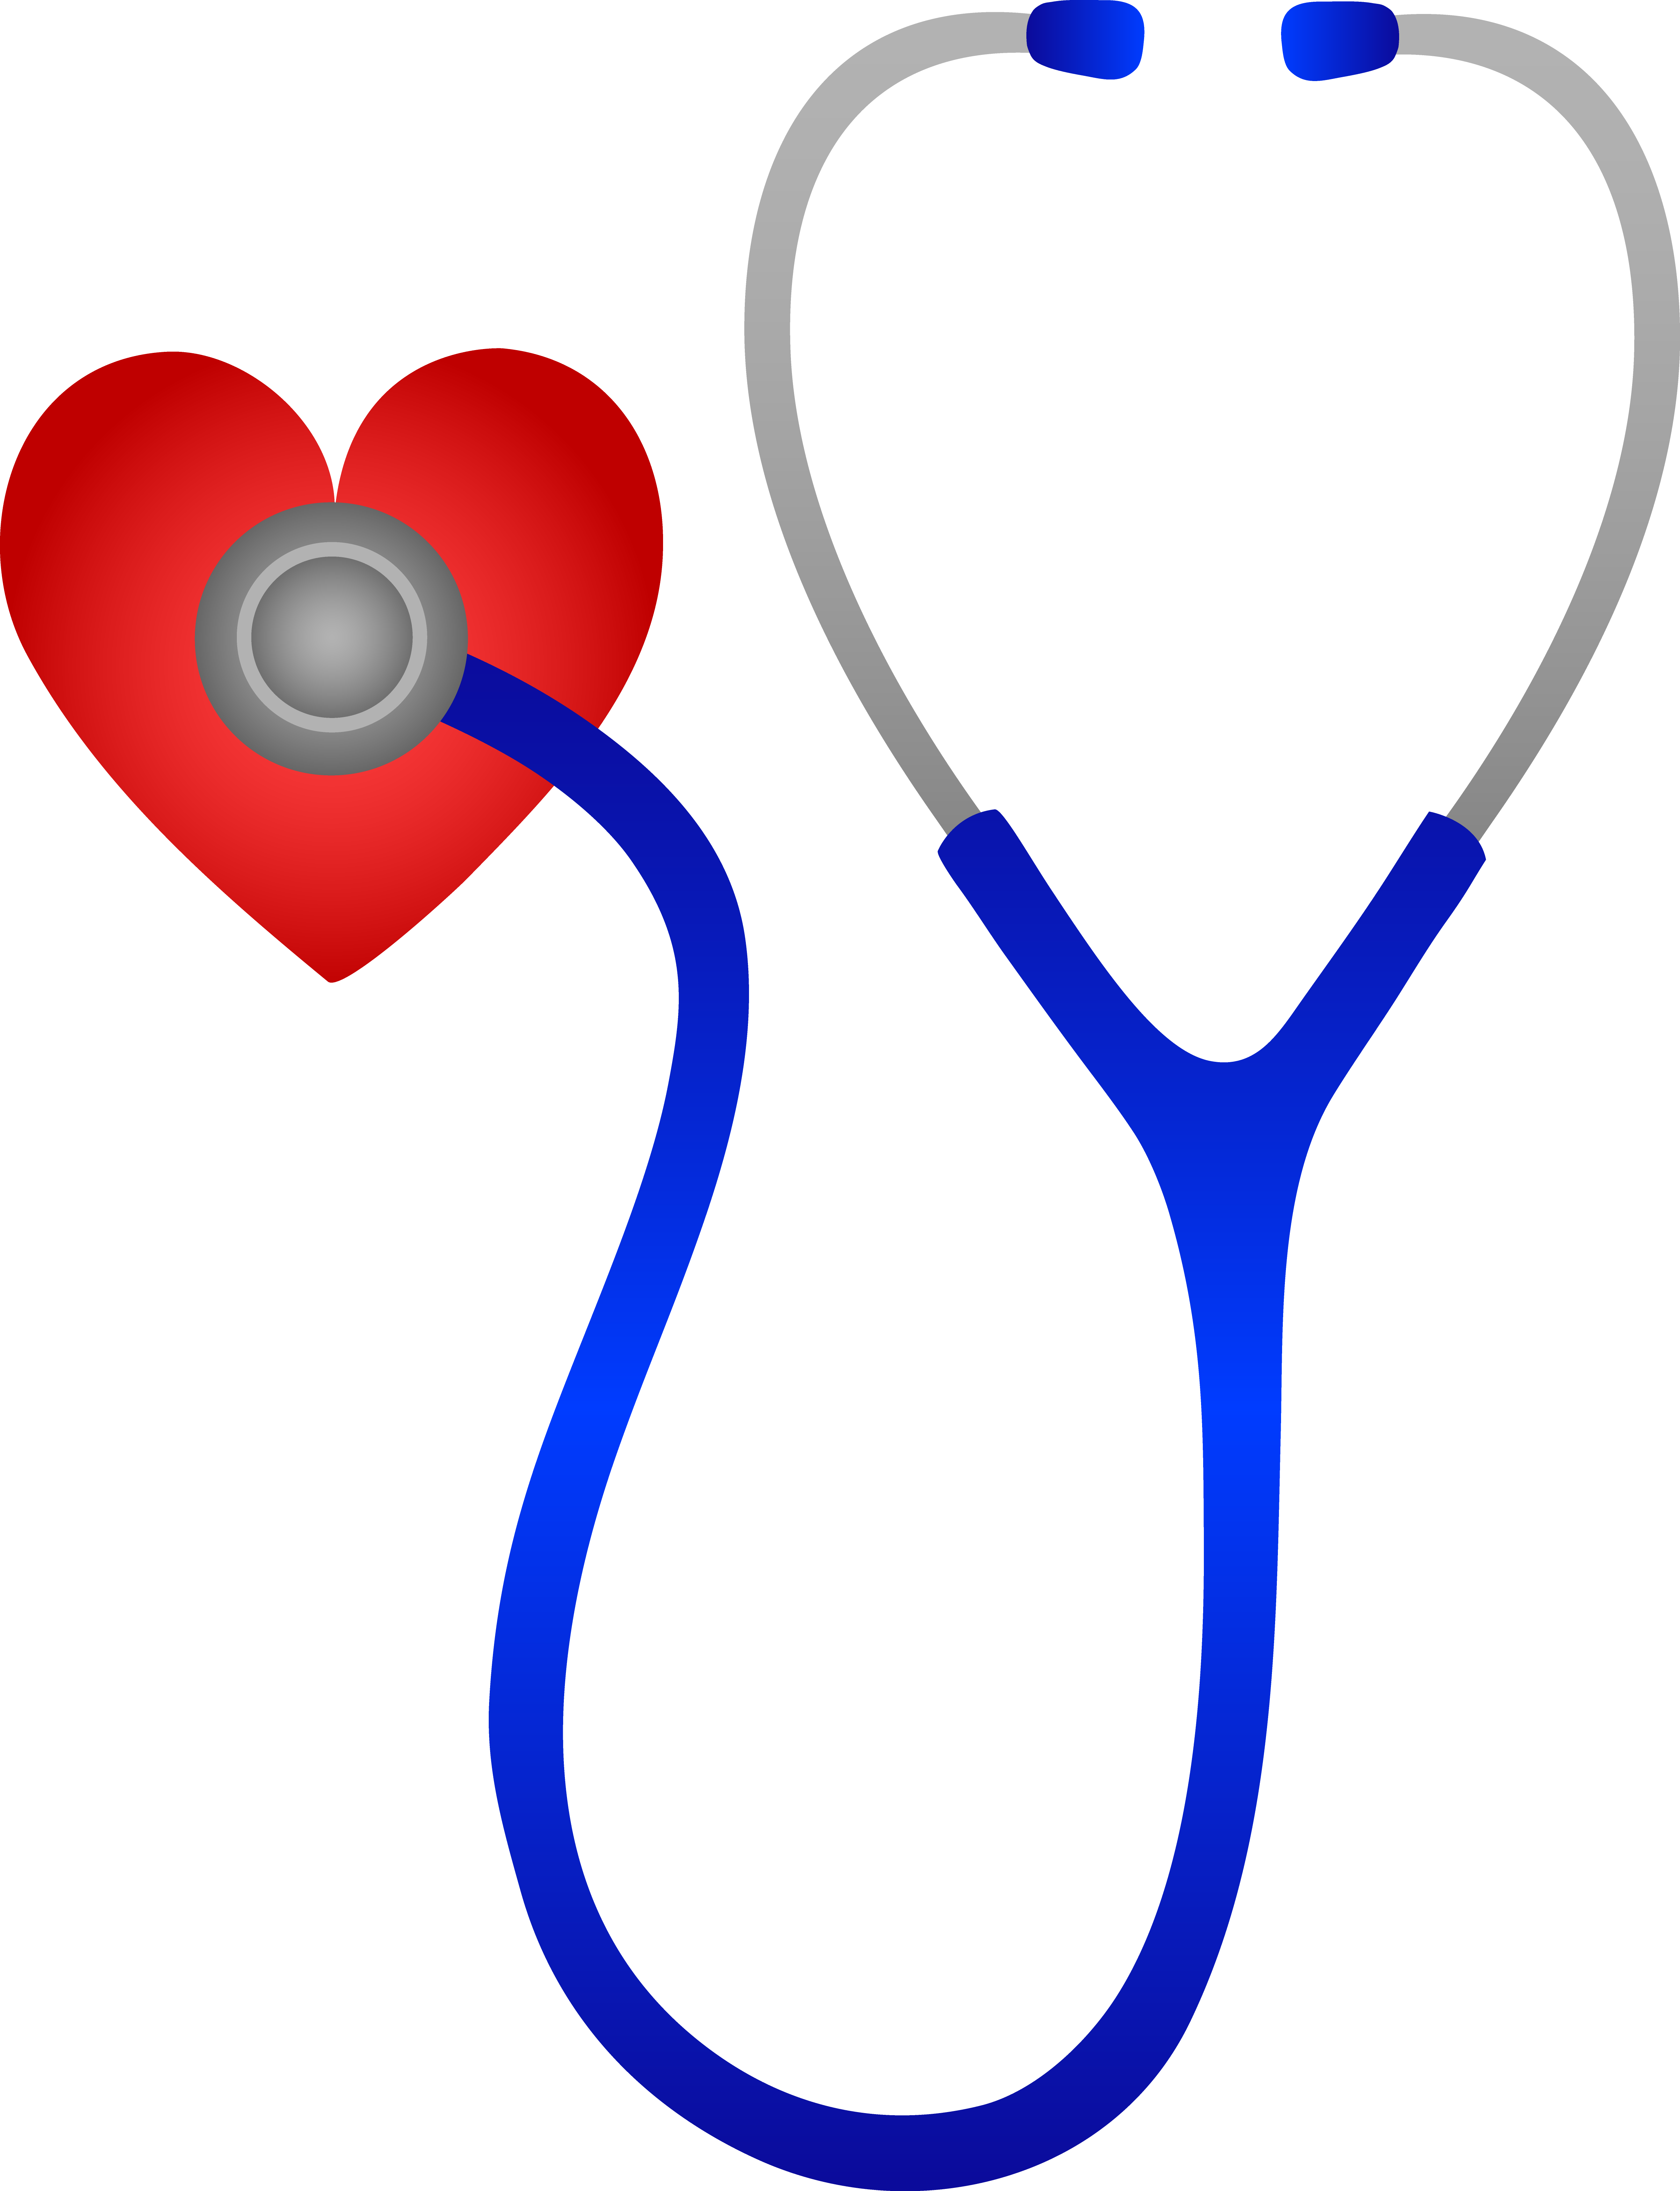 Blue Stethoscope and Red Heart